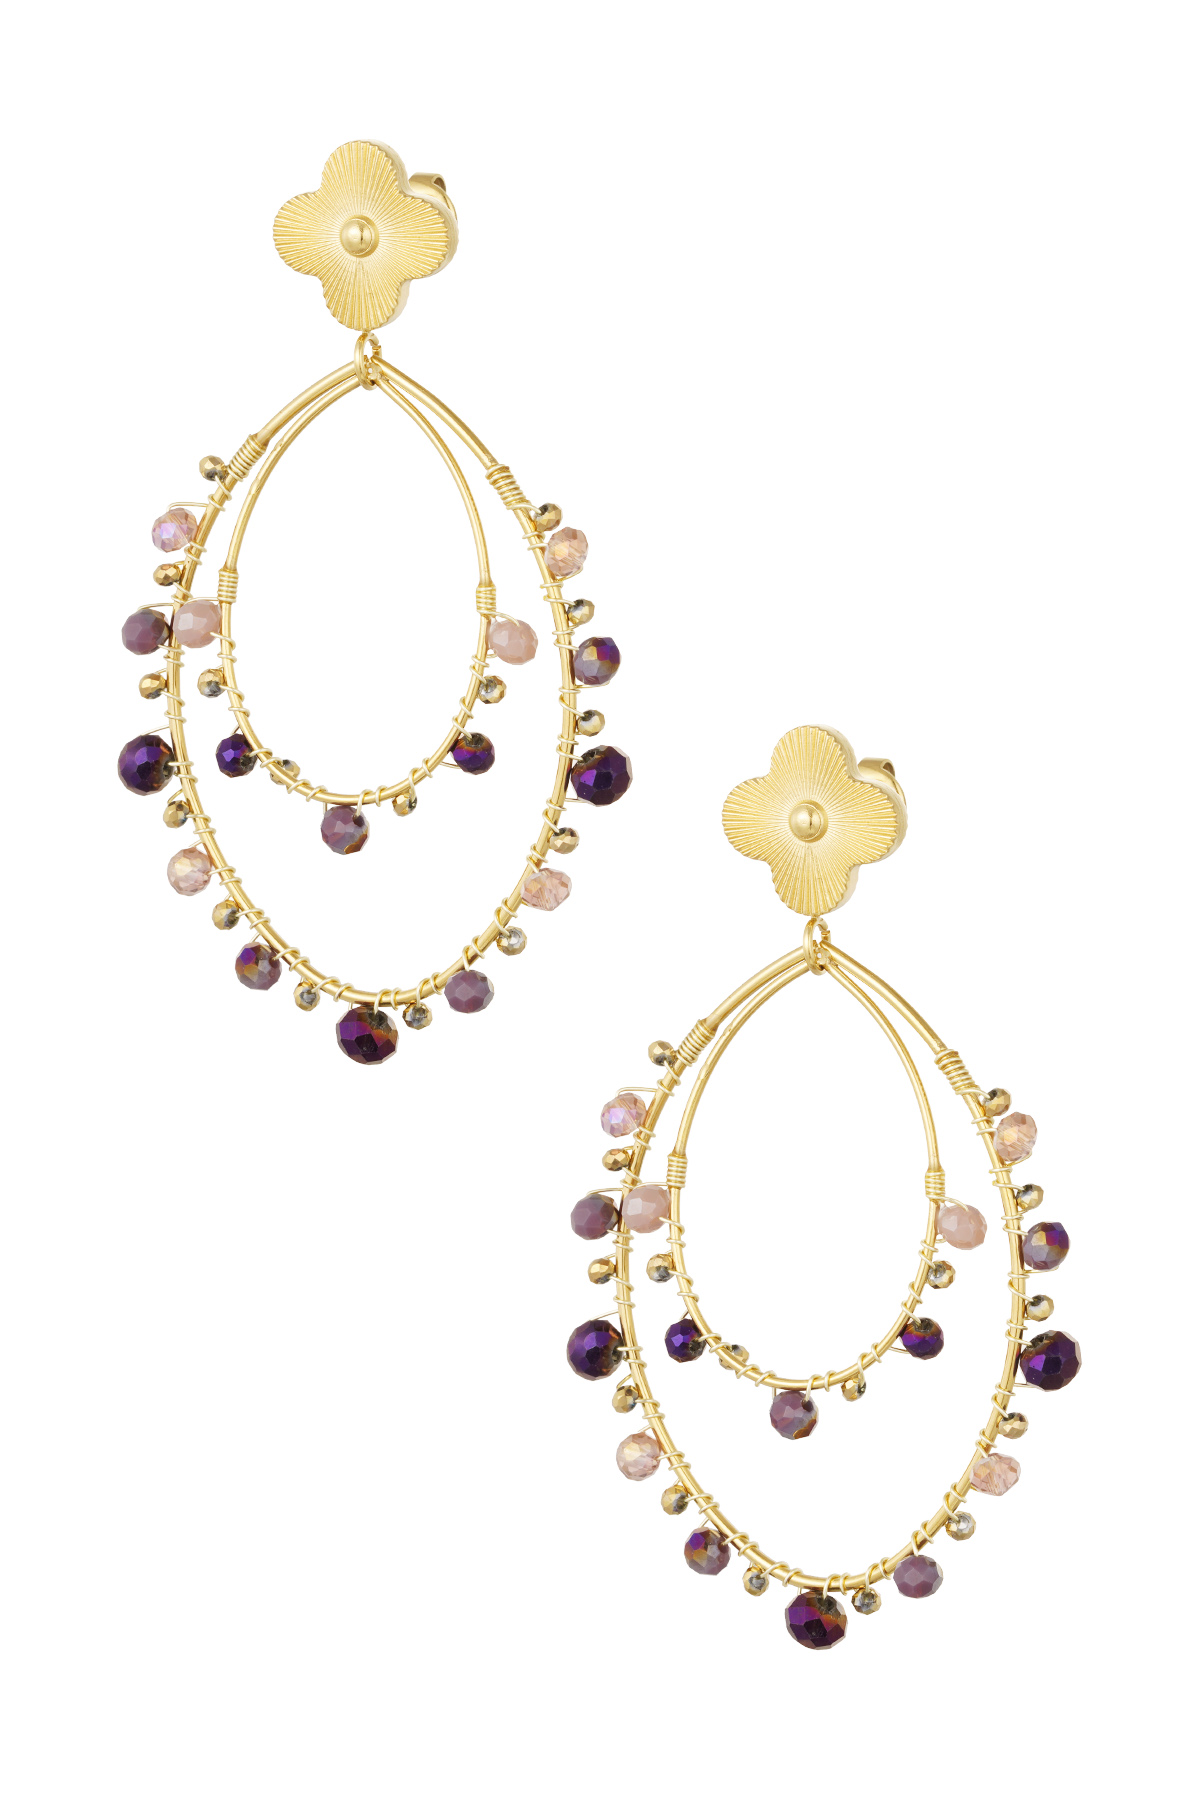 Oval earrings with beads - gold/purple